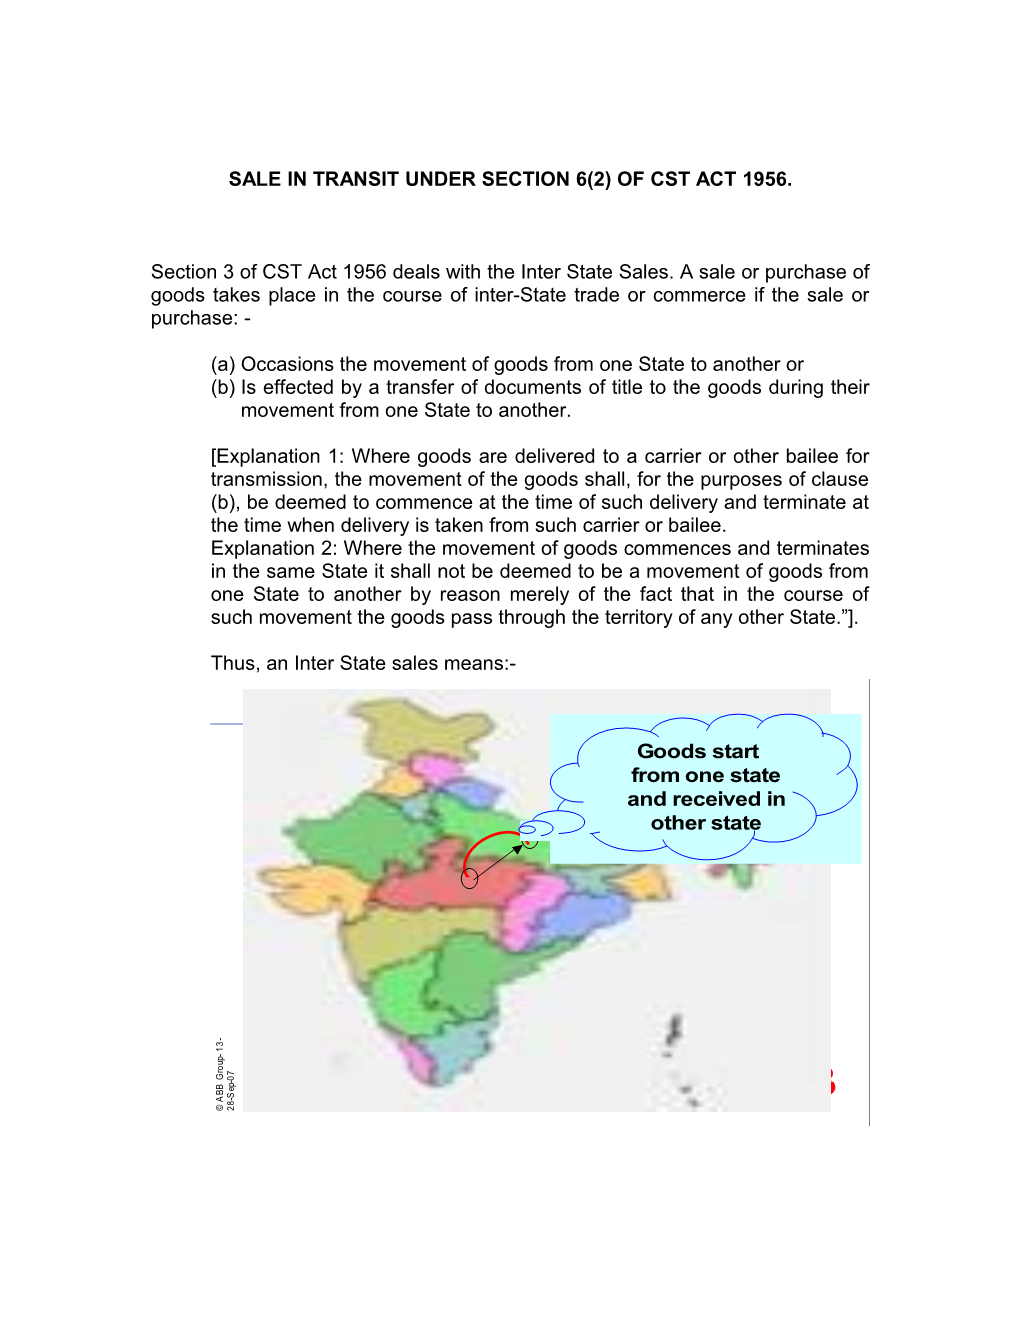 Sale in Transit Under Section 6(2) of Cst Act 1956